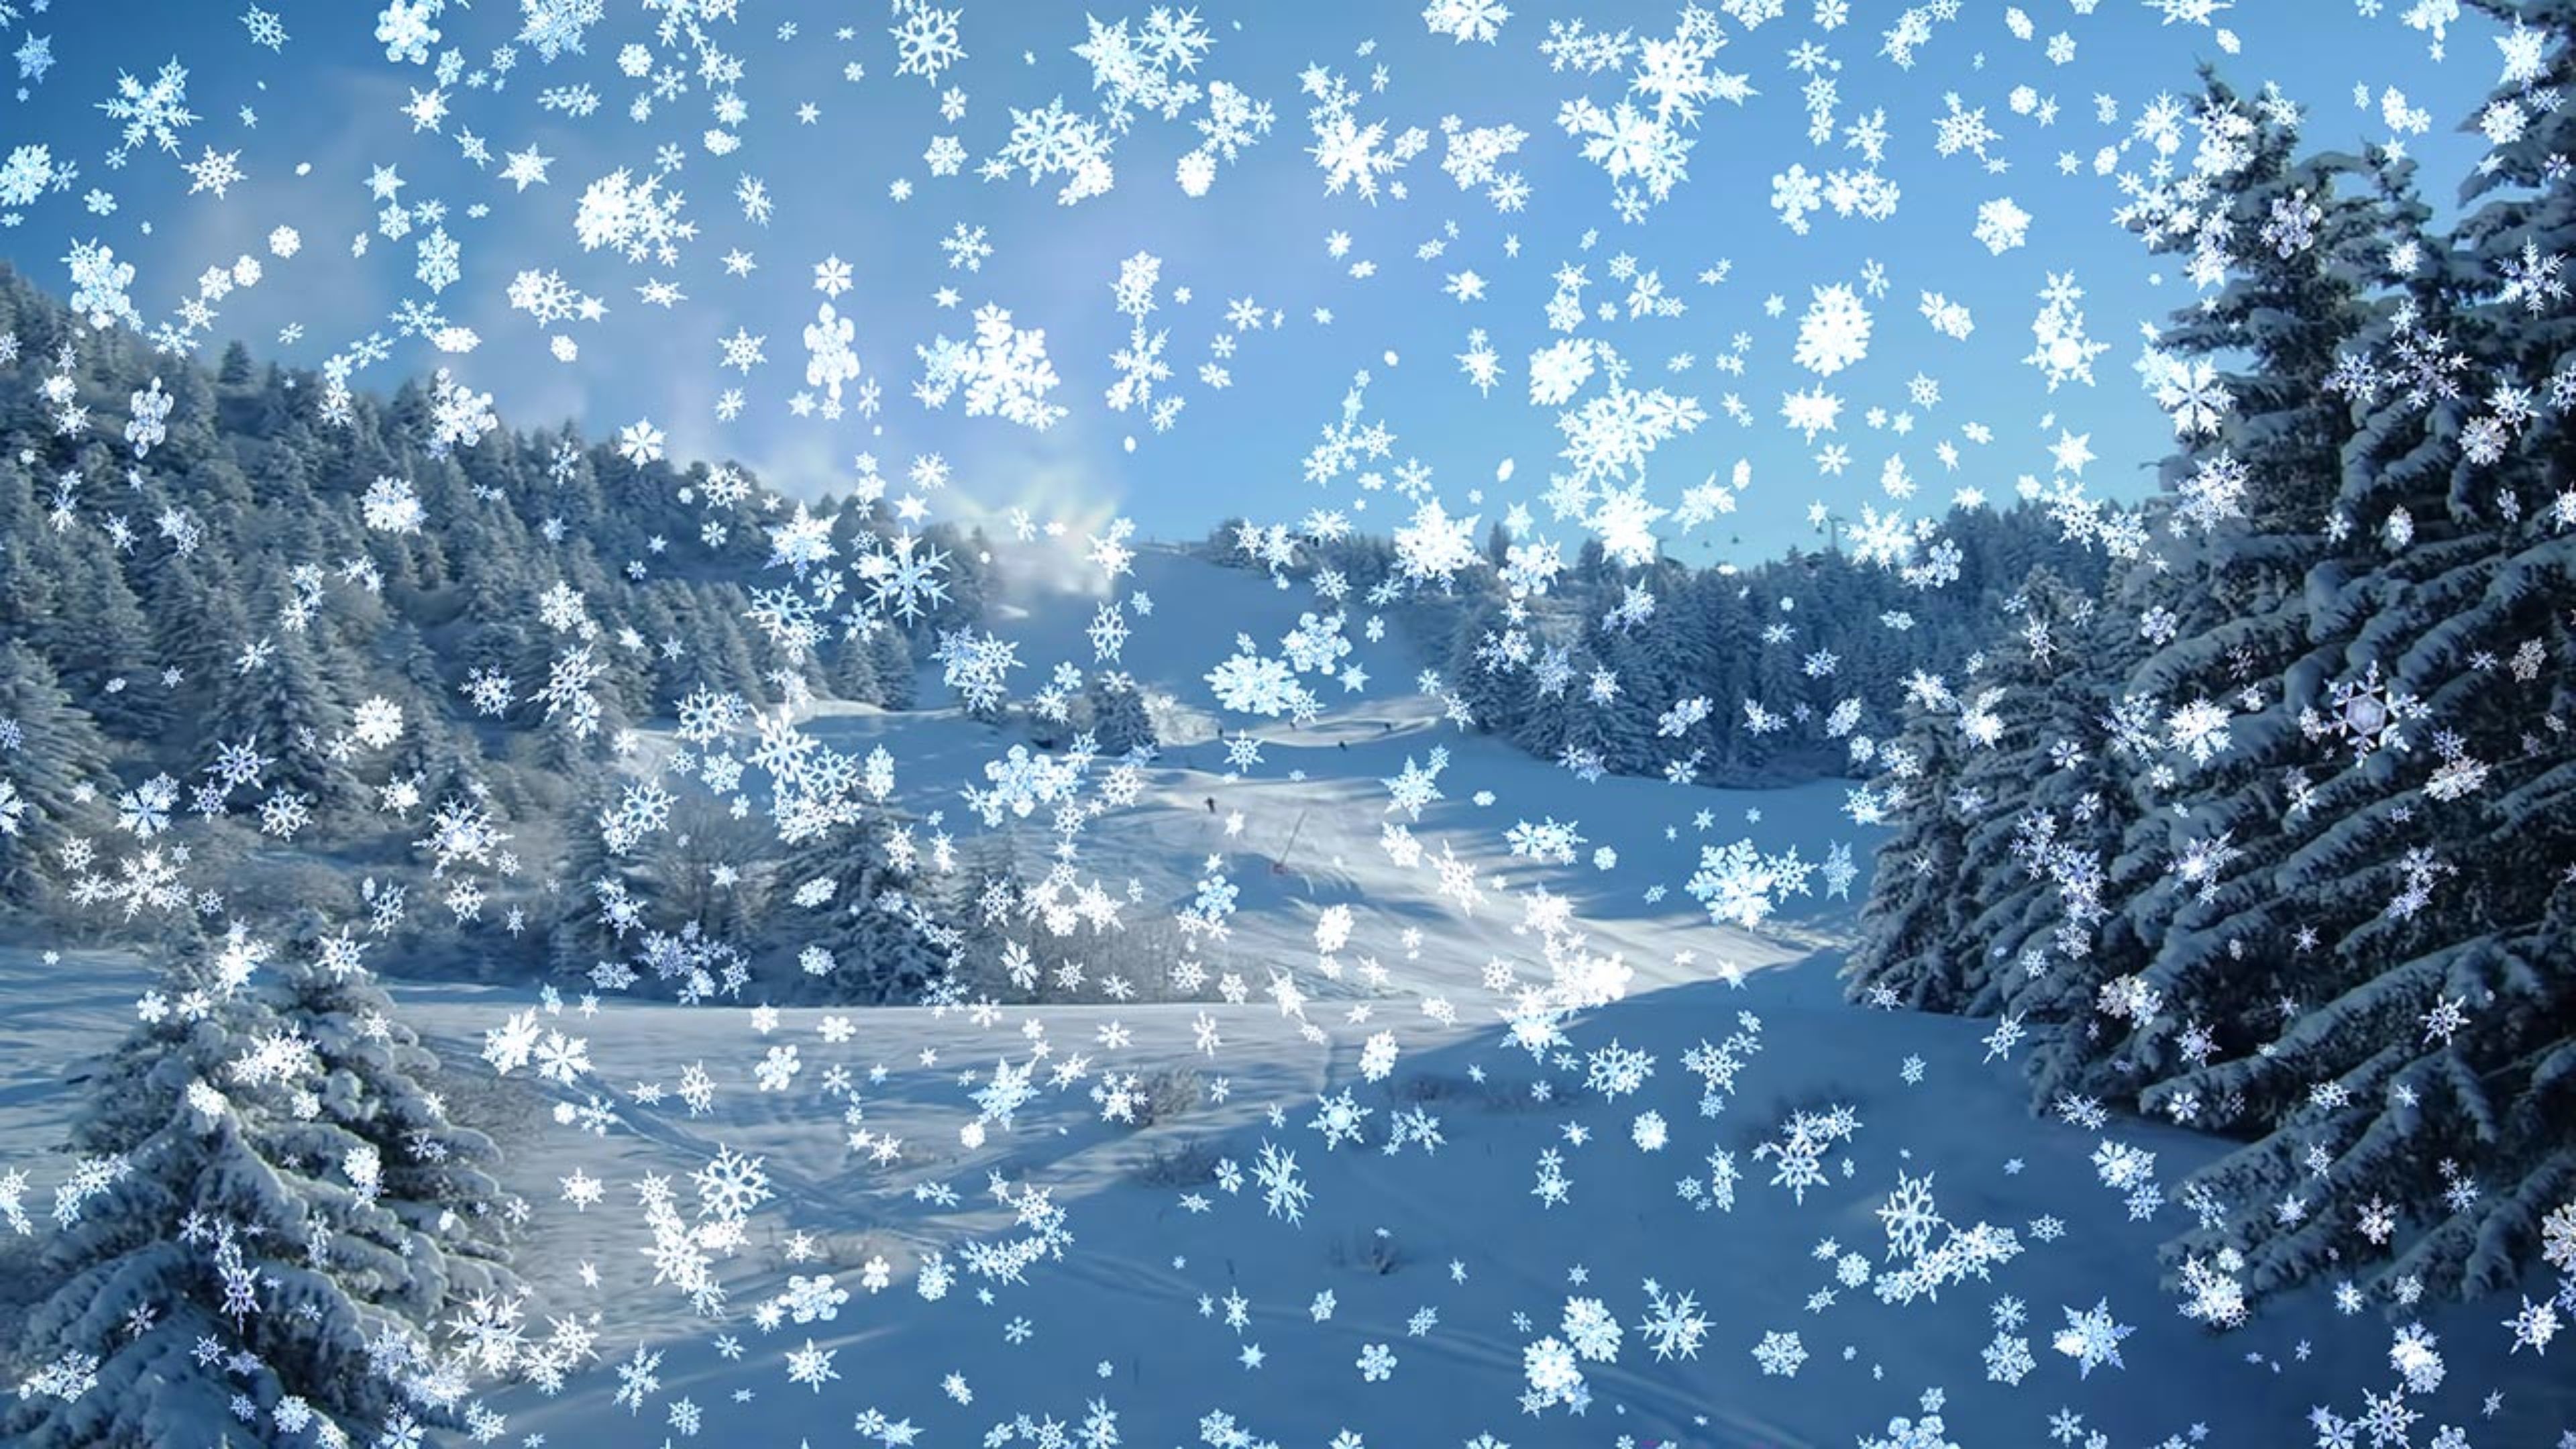 3840x2160 Images Of Snow wallpapers (57 Wallpapers)